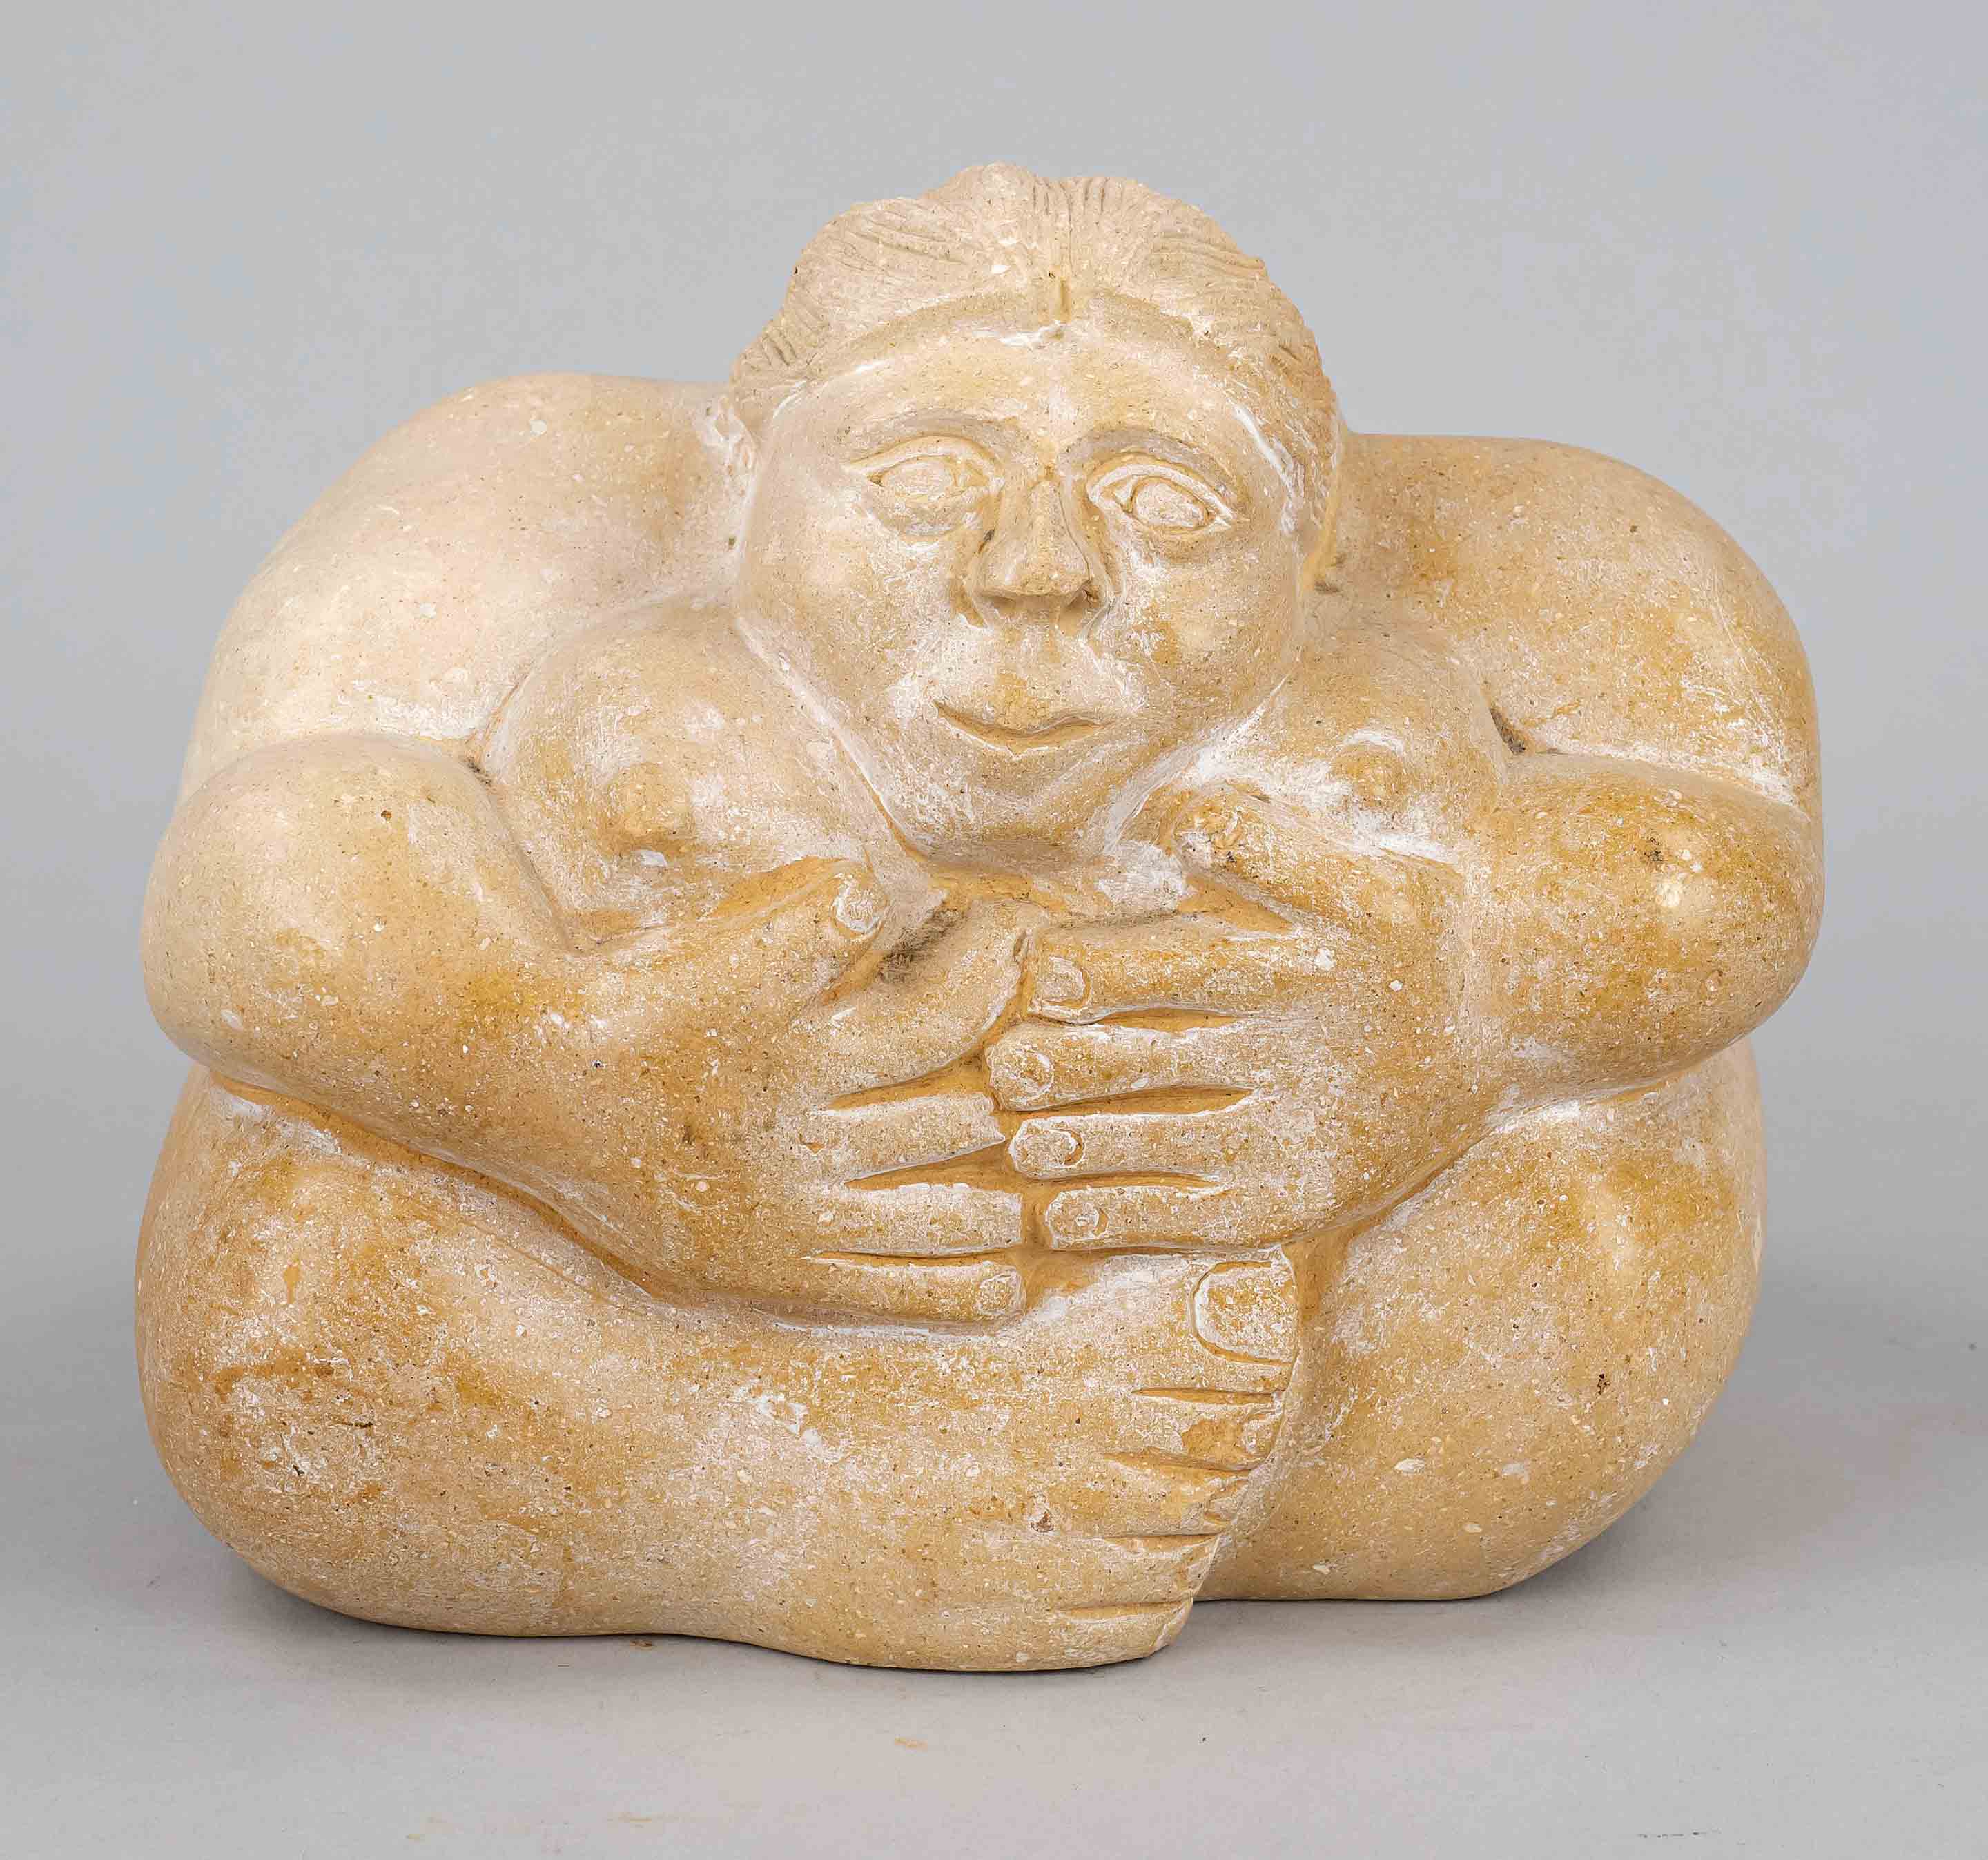 Contemporary sculptor, seated lady, female nude in highly stylized representation made of cast